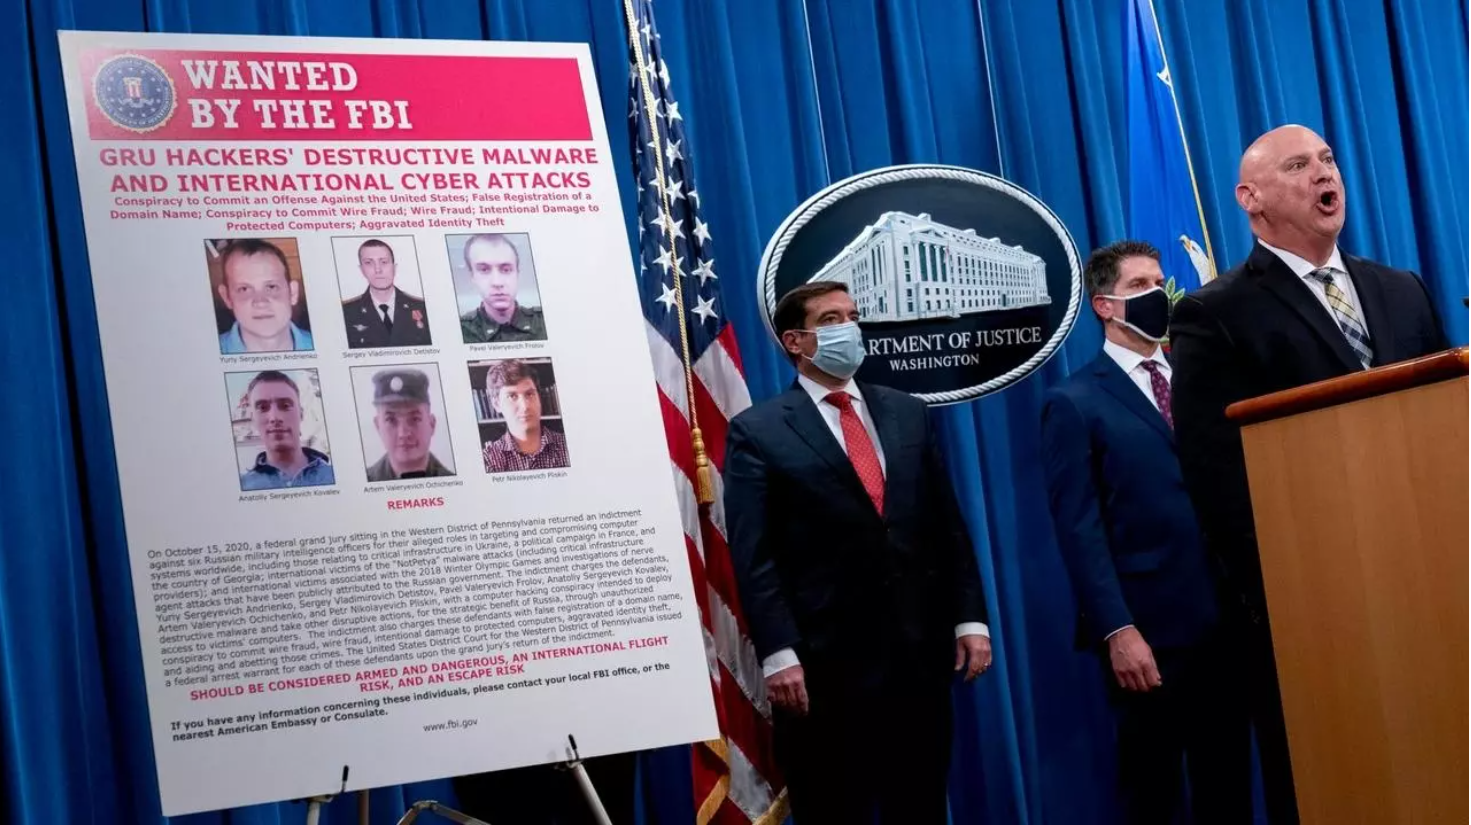 A poster showing six wanted Russian military intelligence officers is displayed as FBI agents and Assistant Attorney General John Demers address a news conference on October 19, 2020 in Washington, D.C., USA. A poster showing six wanted Russian military i